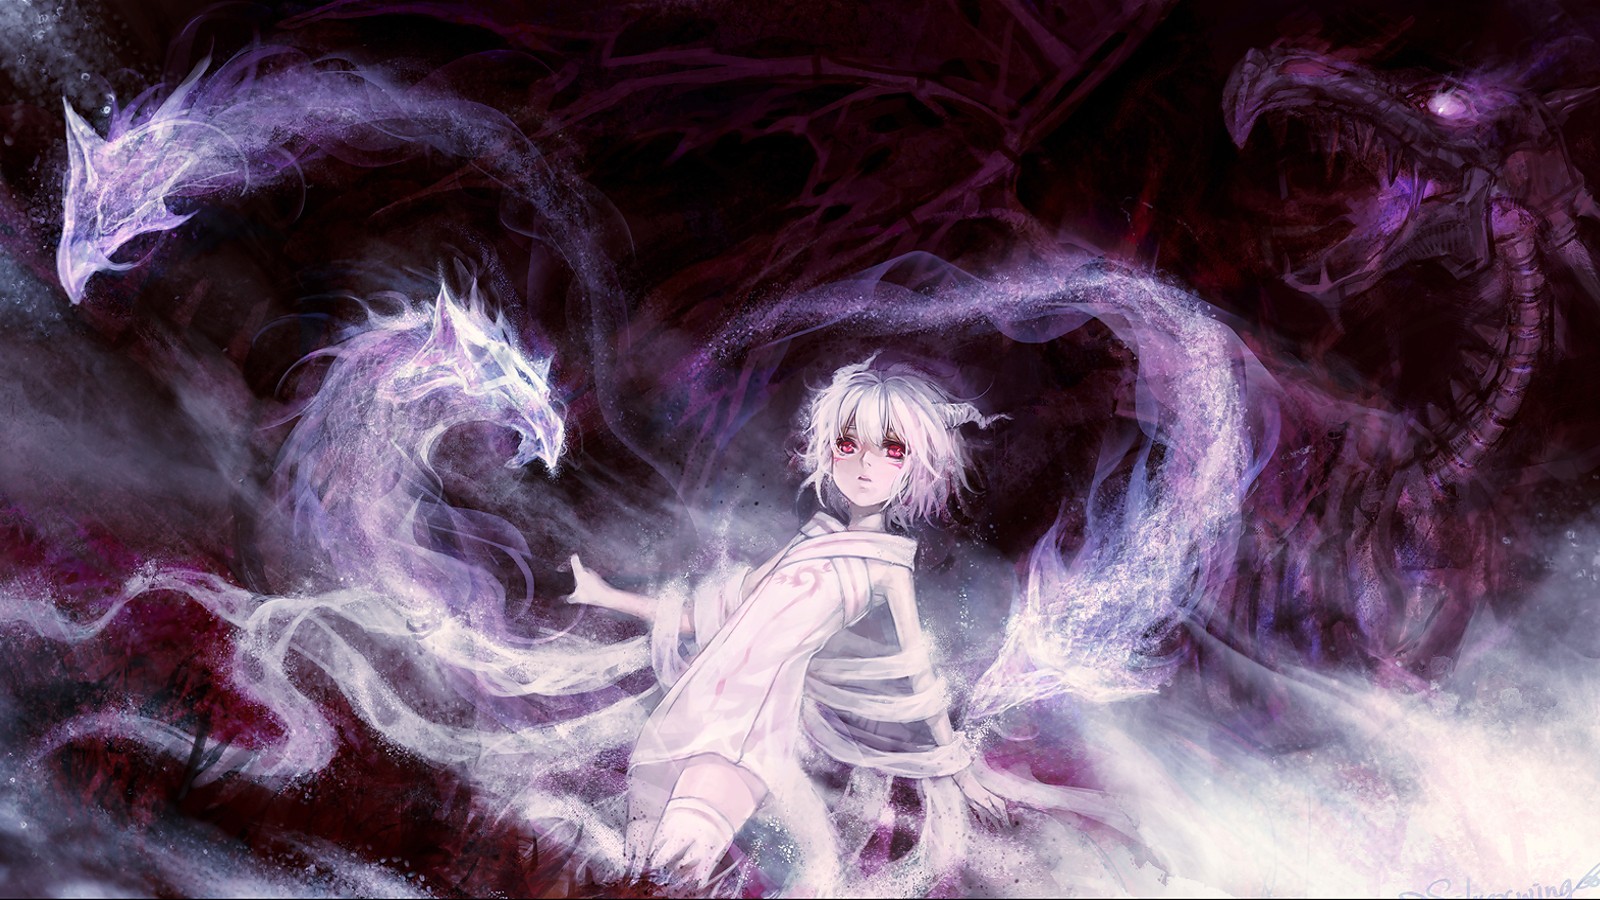 Anime Girl With Shadow Powers - 1600x900 Wallpaper 